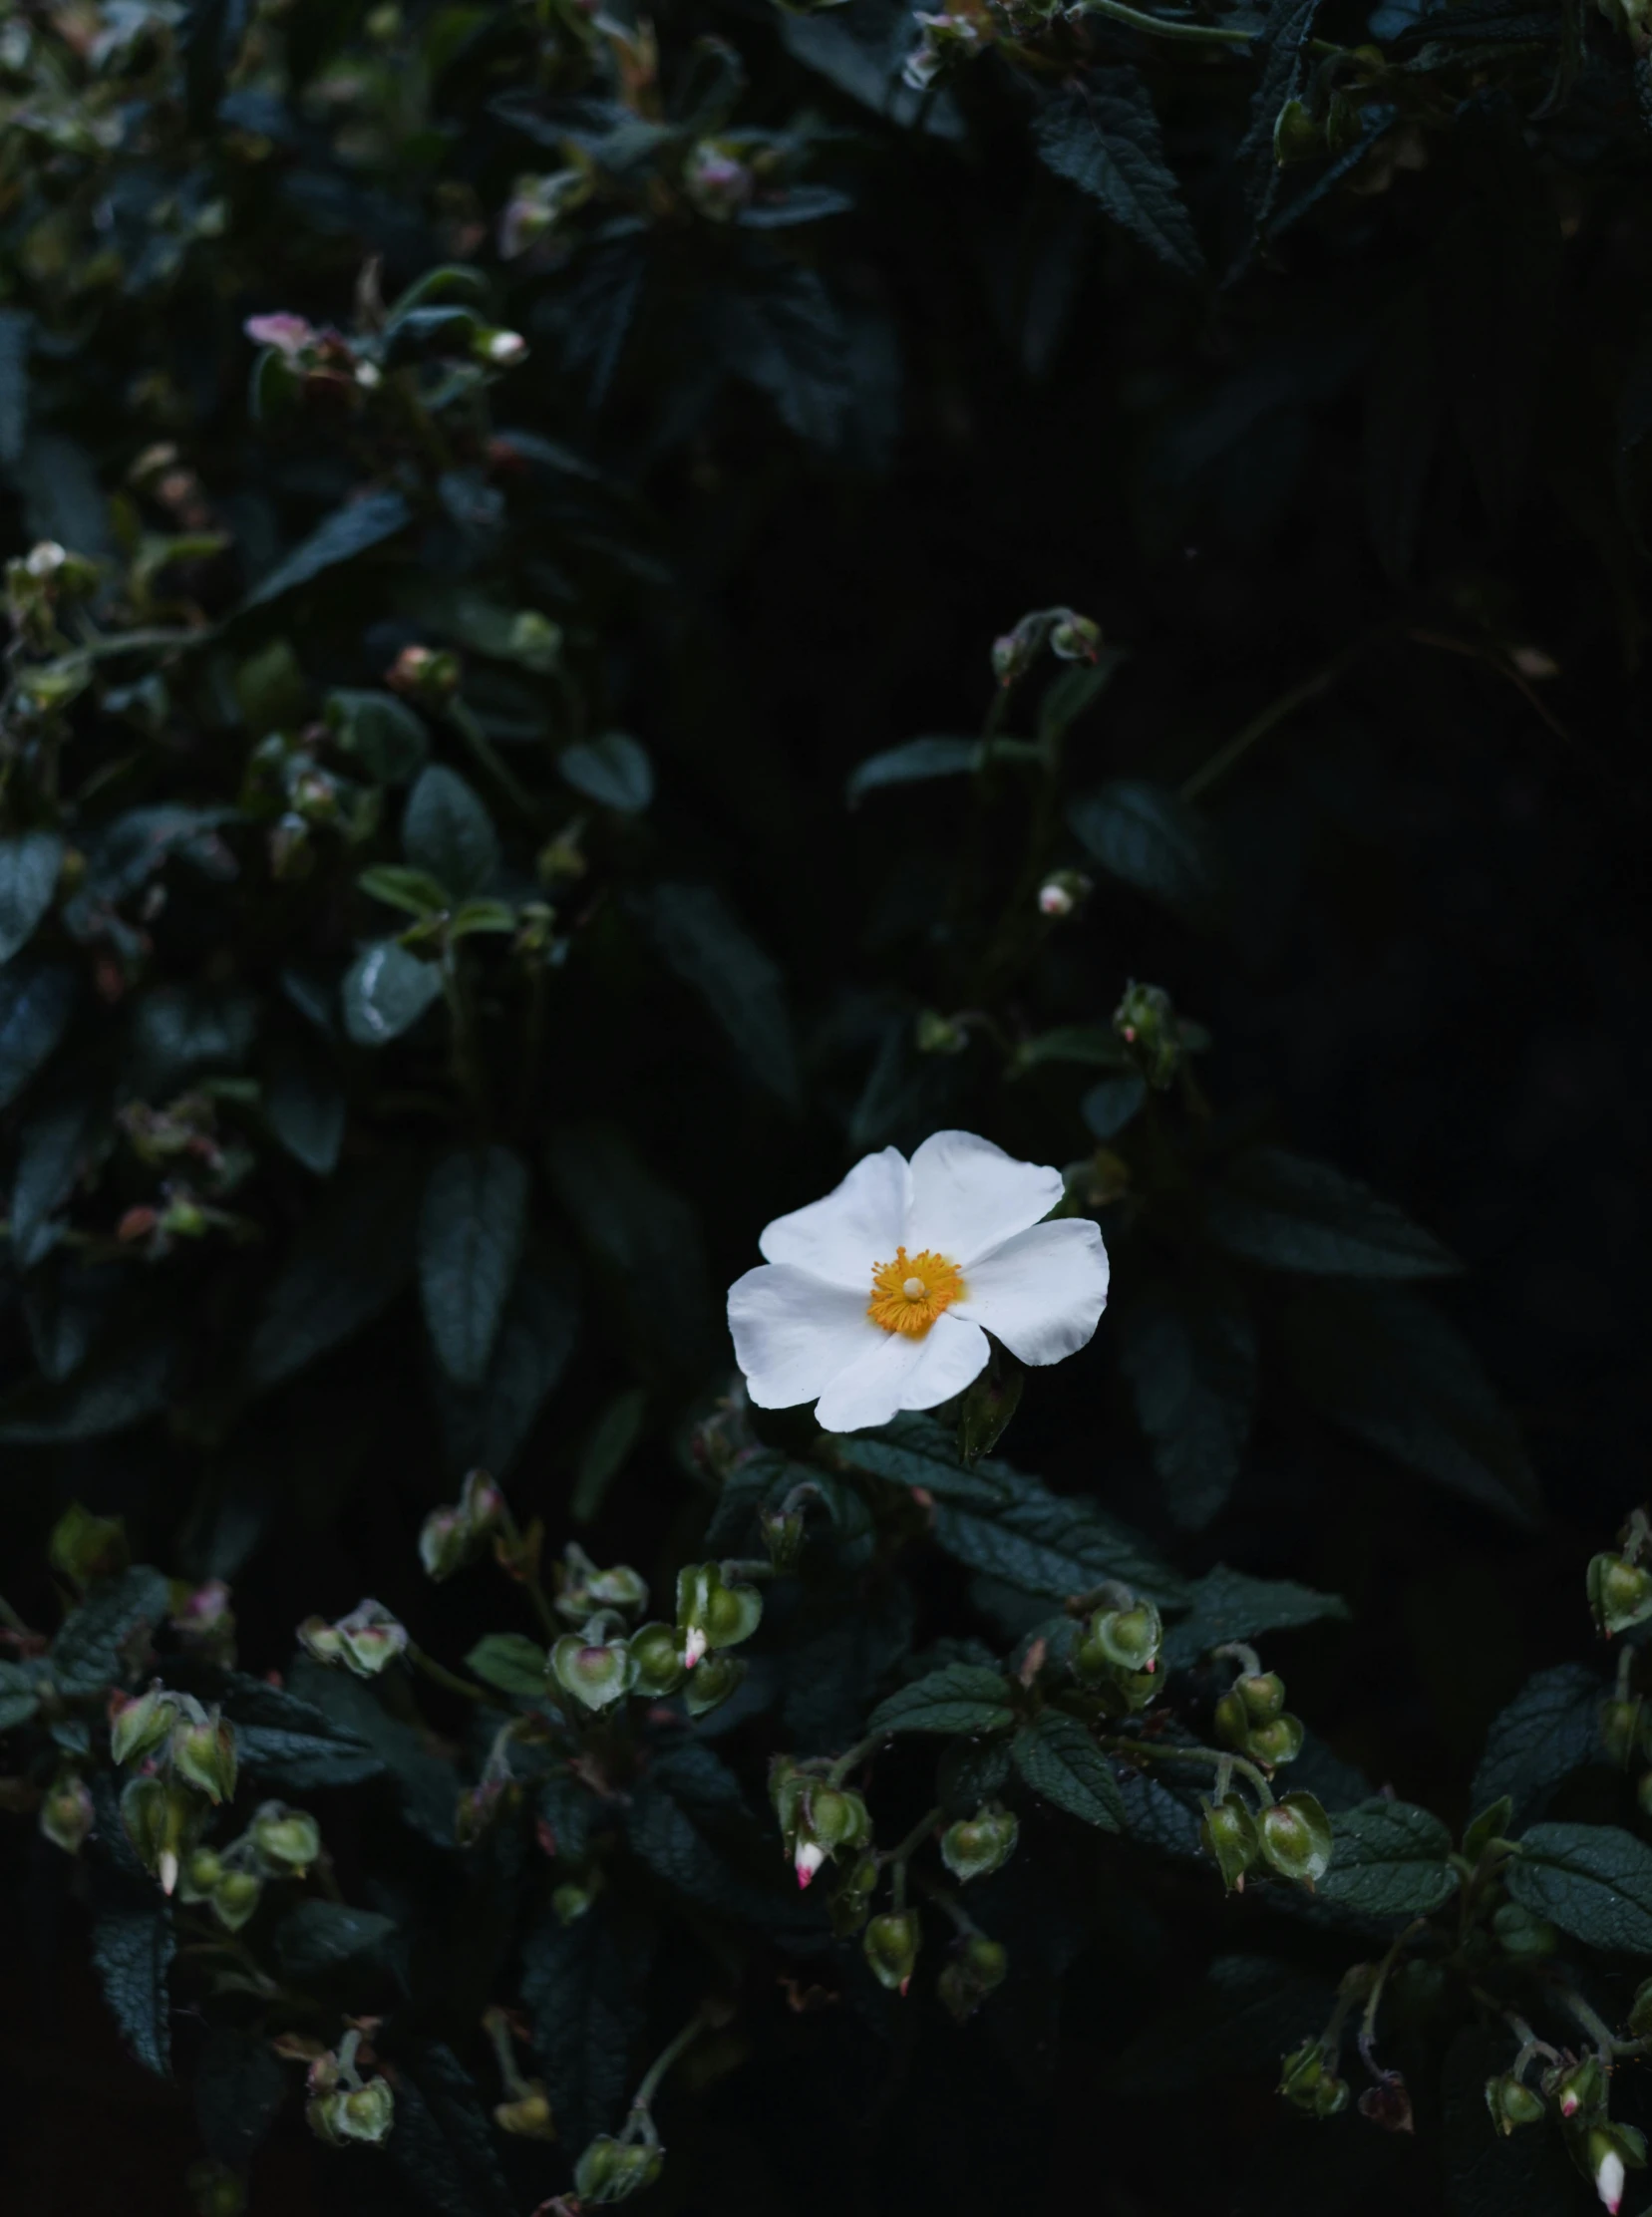 an unknown white flower sitting among some green leaves